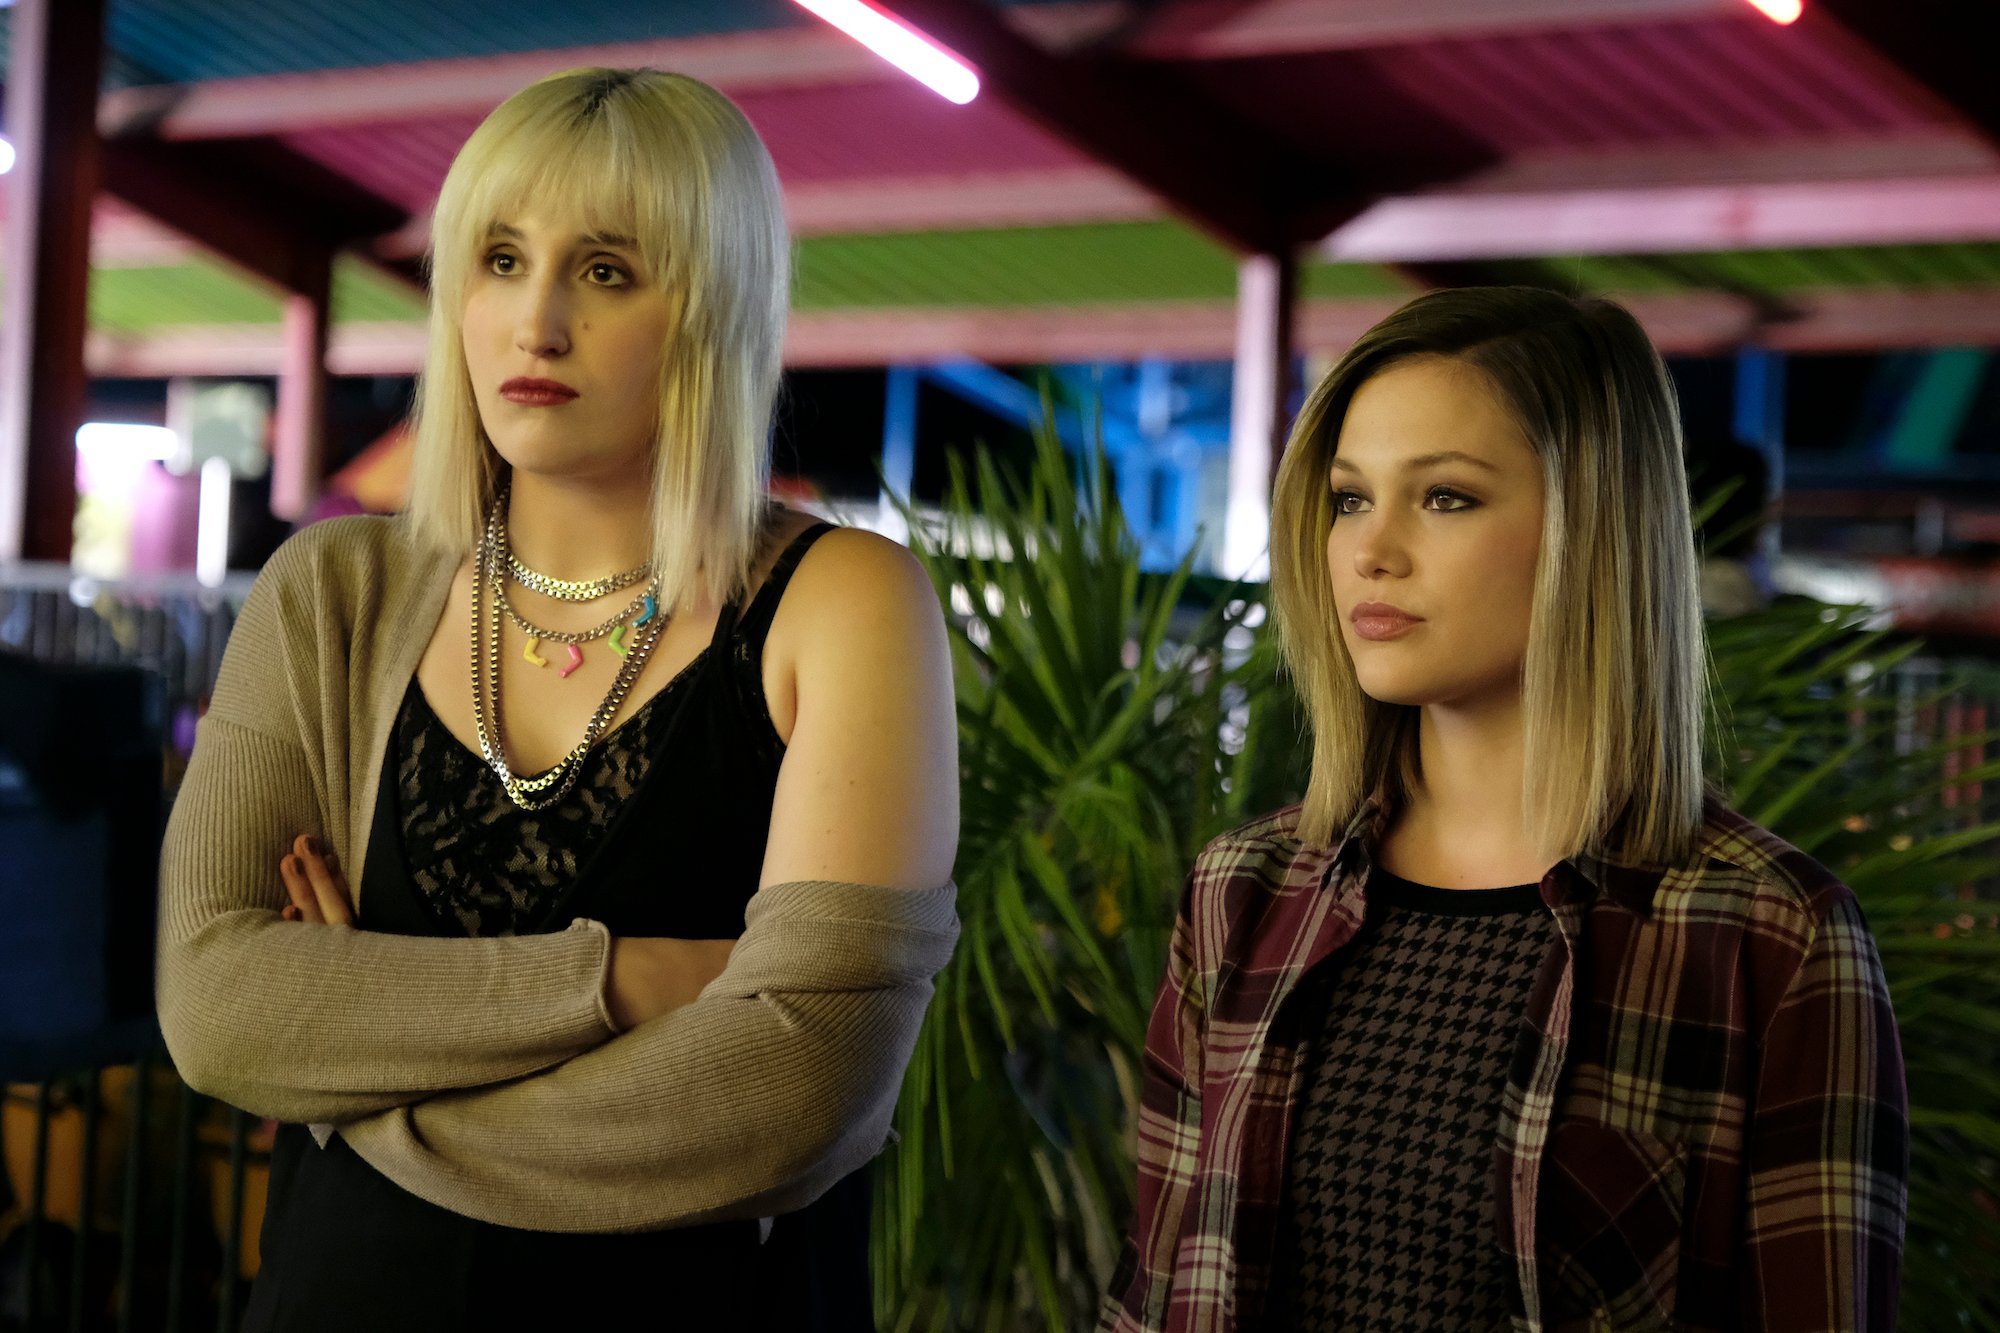 'CRUEL SUMMER' "As The Carny Gods Intended" Episode 5, Harley Quinn Smith as Mallory and Olivia Holt as Kate Wallis in 1995 at the carnival